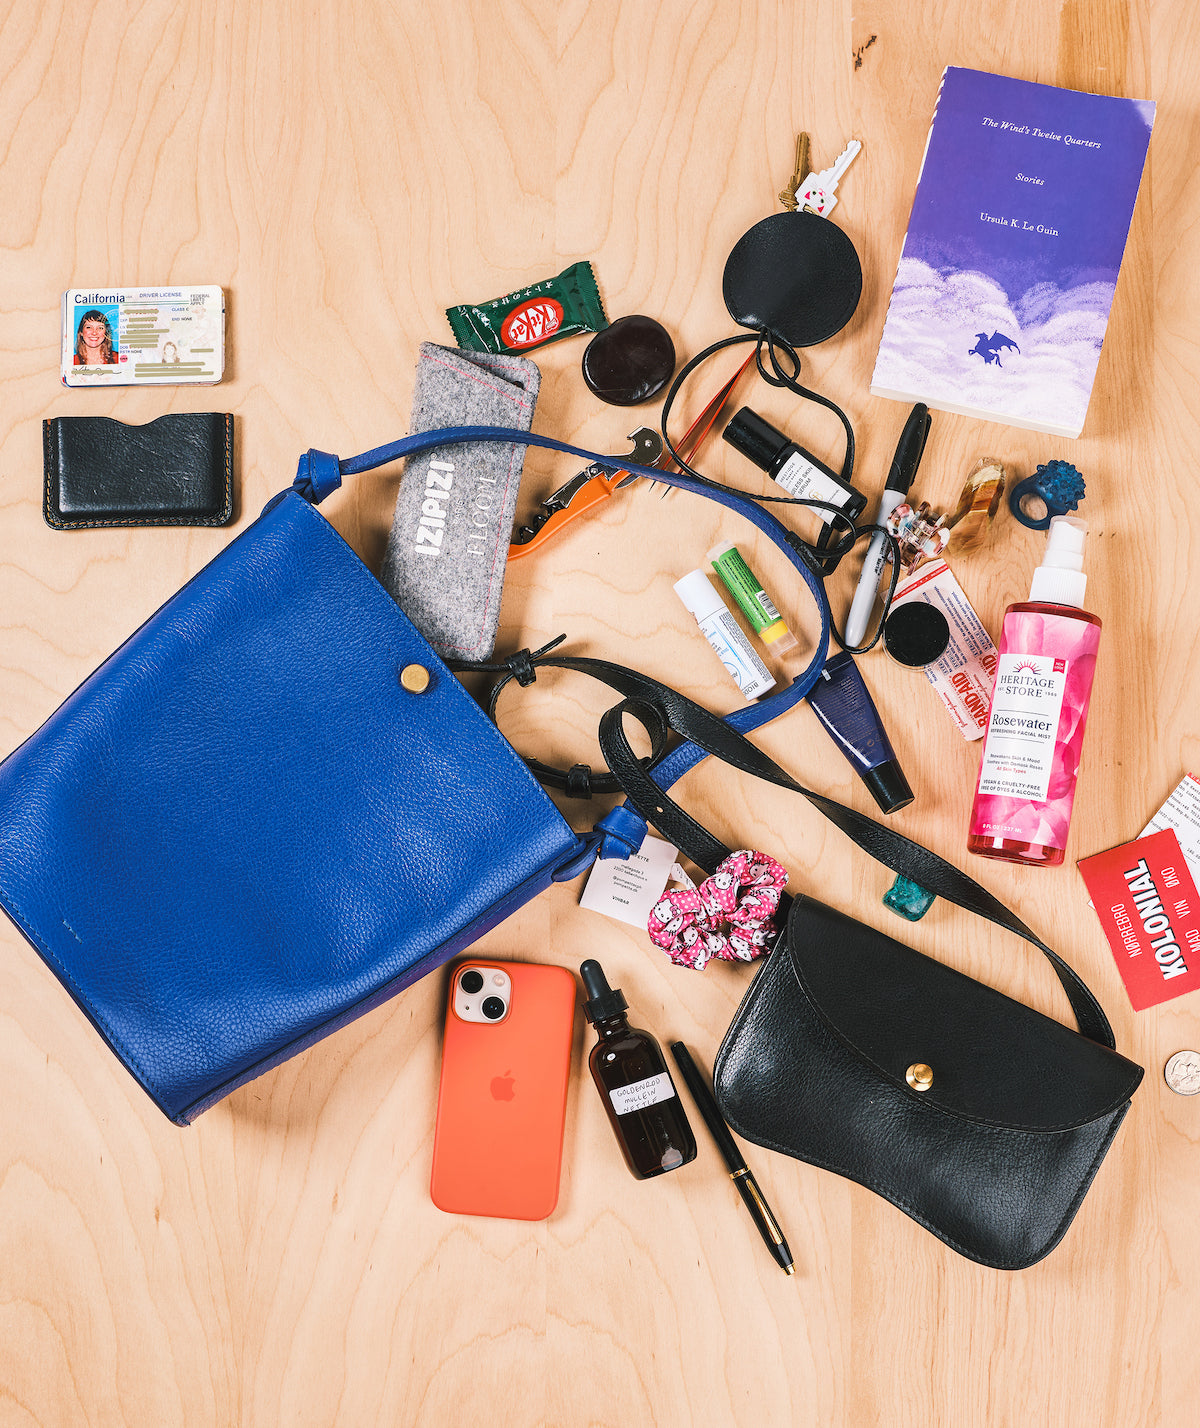 WHAT'S IN THEIR BAG: LINDQUIST